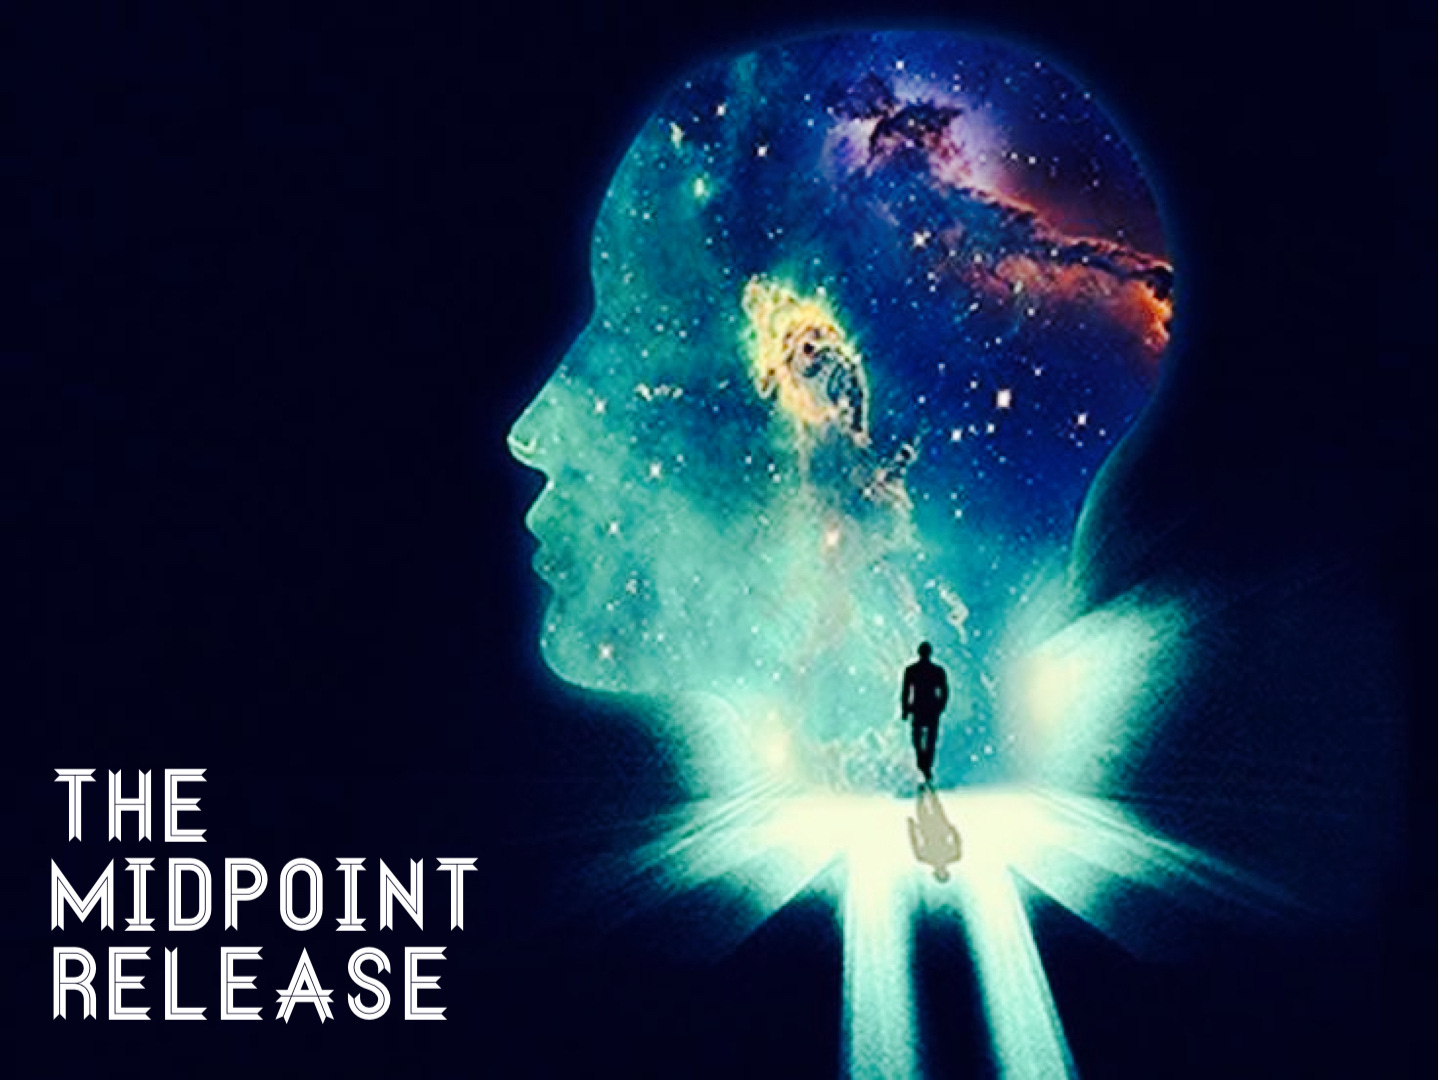 The Midpoint Release